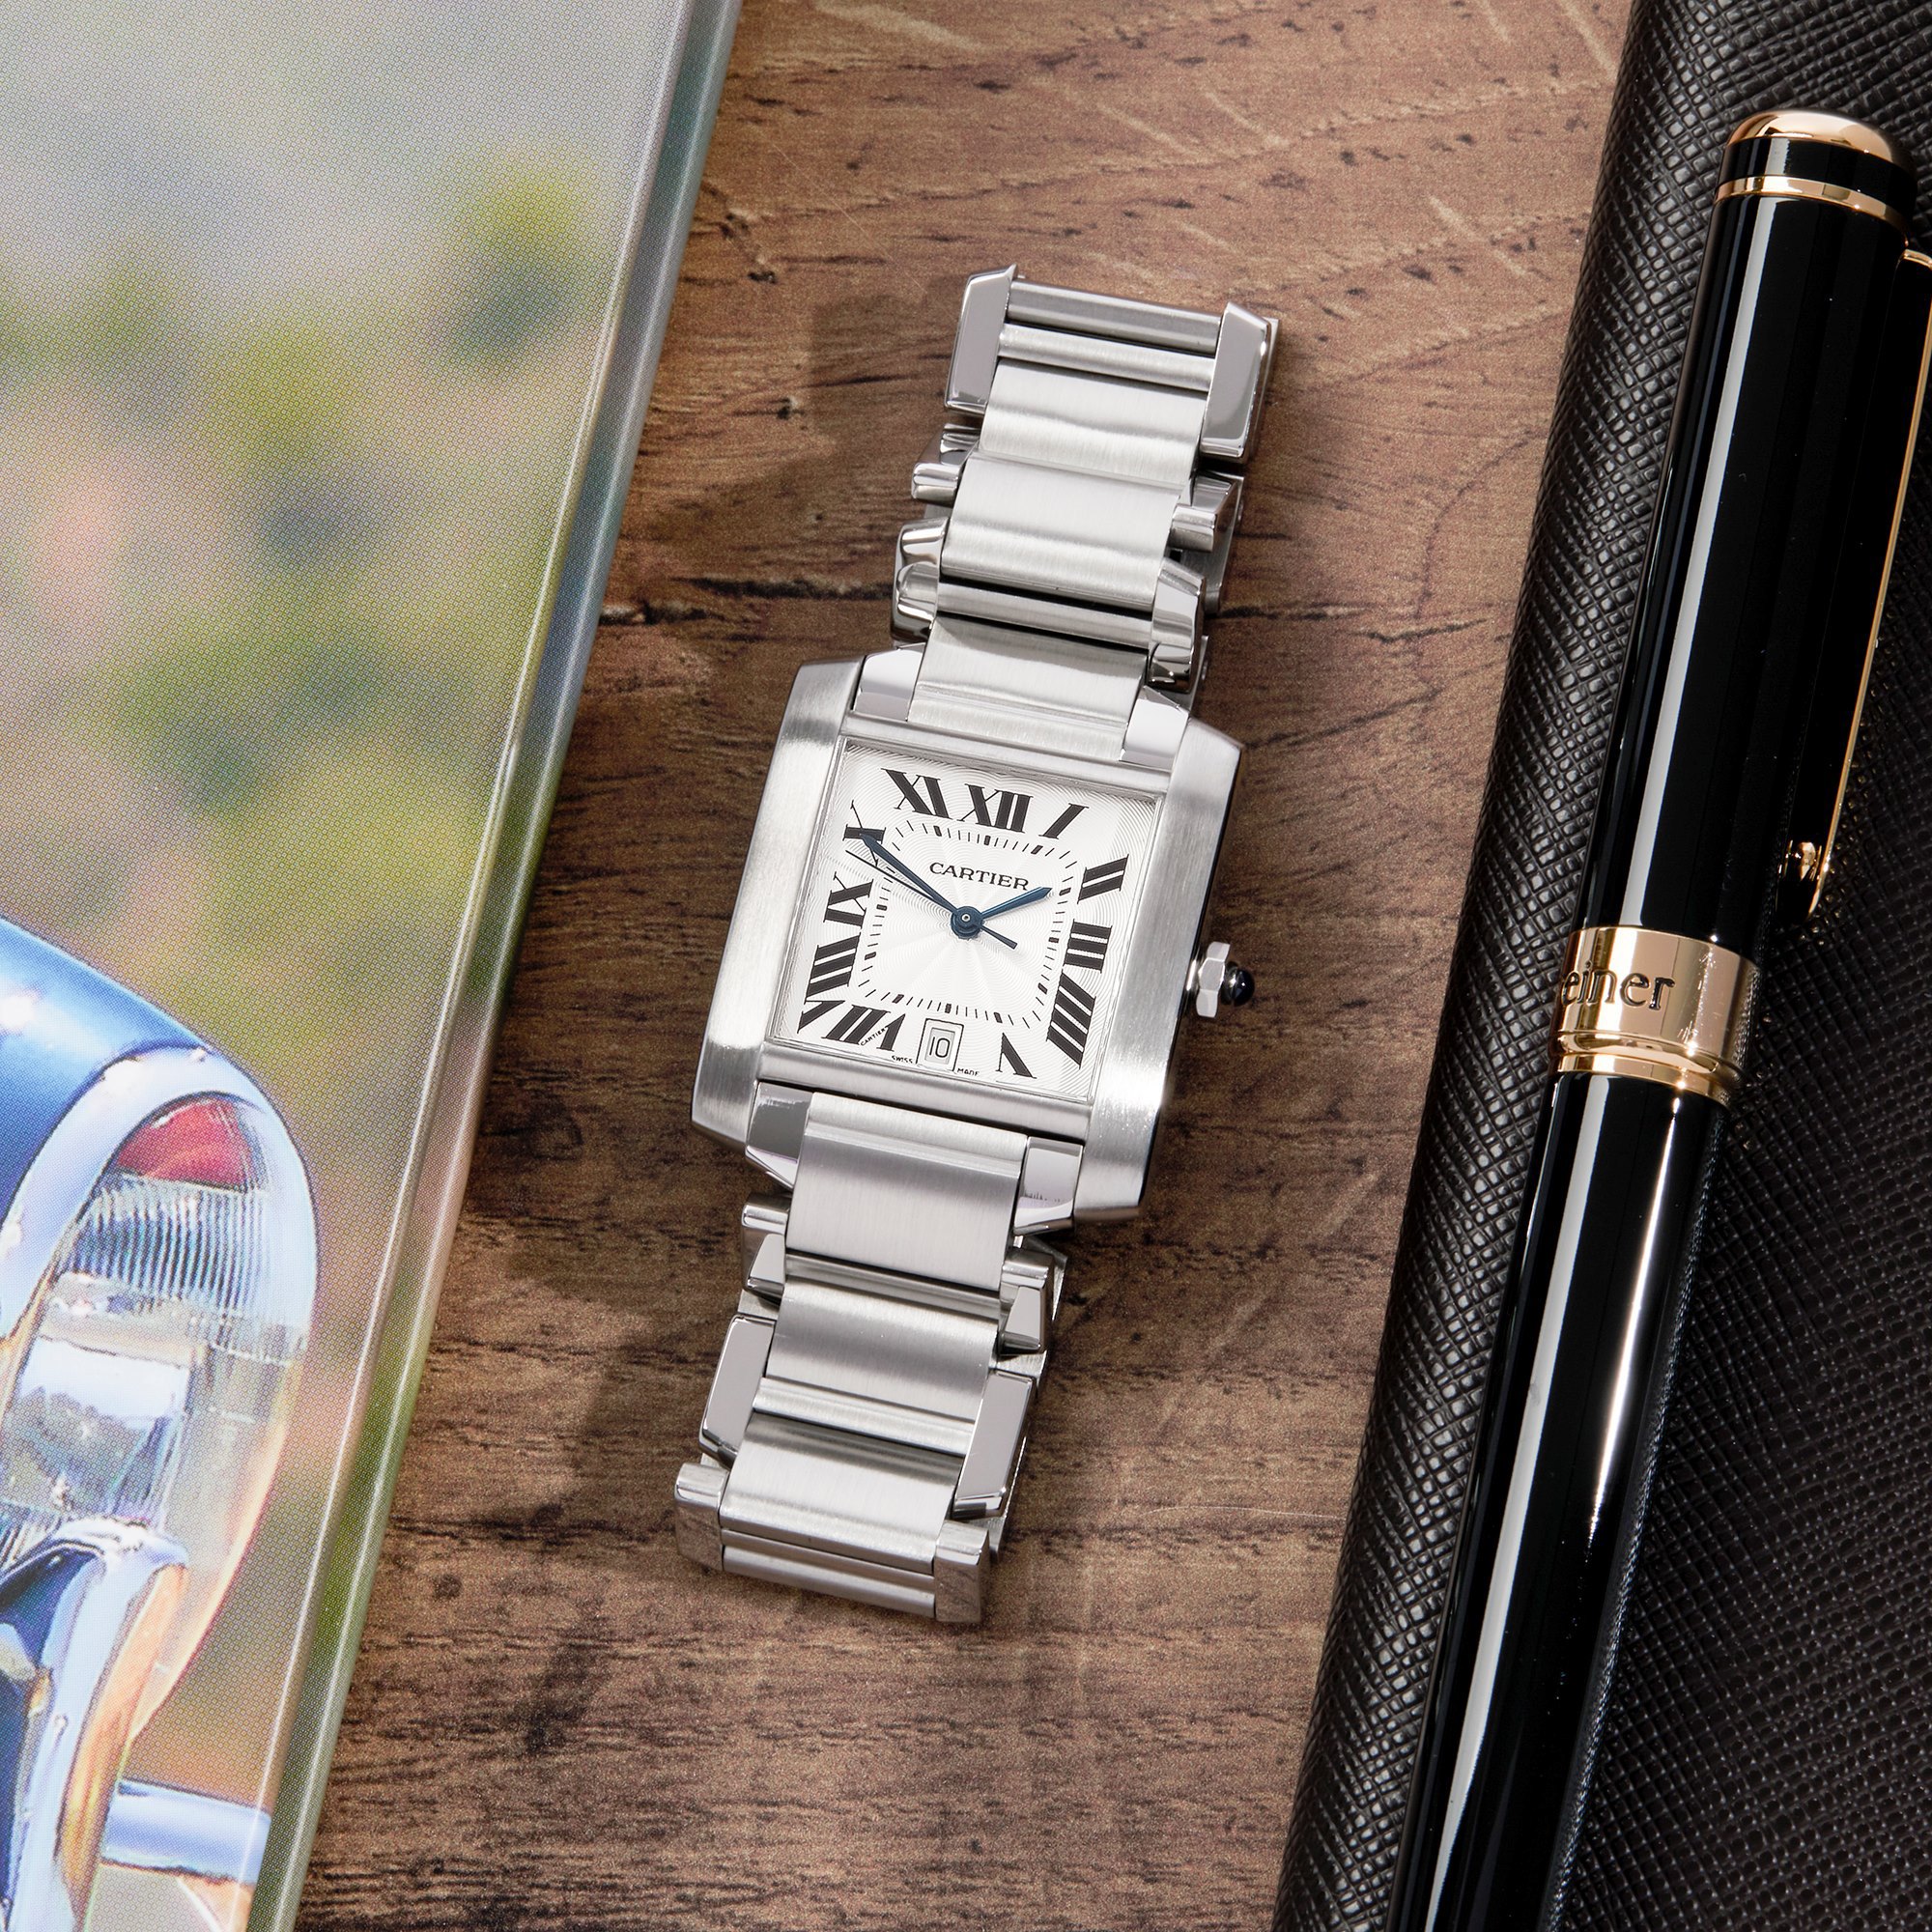 Cartier Tank Francaise Roestvrij Staal W51002Q3 or 2302